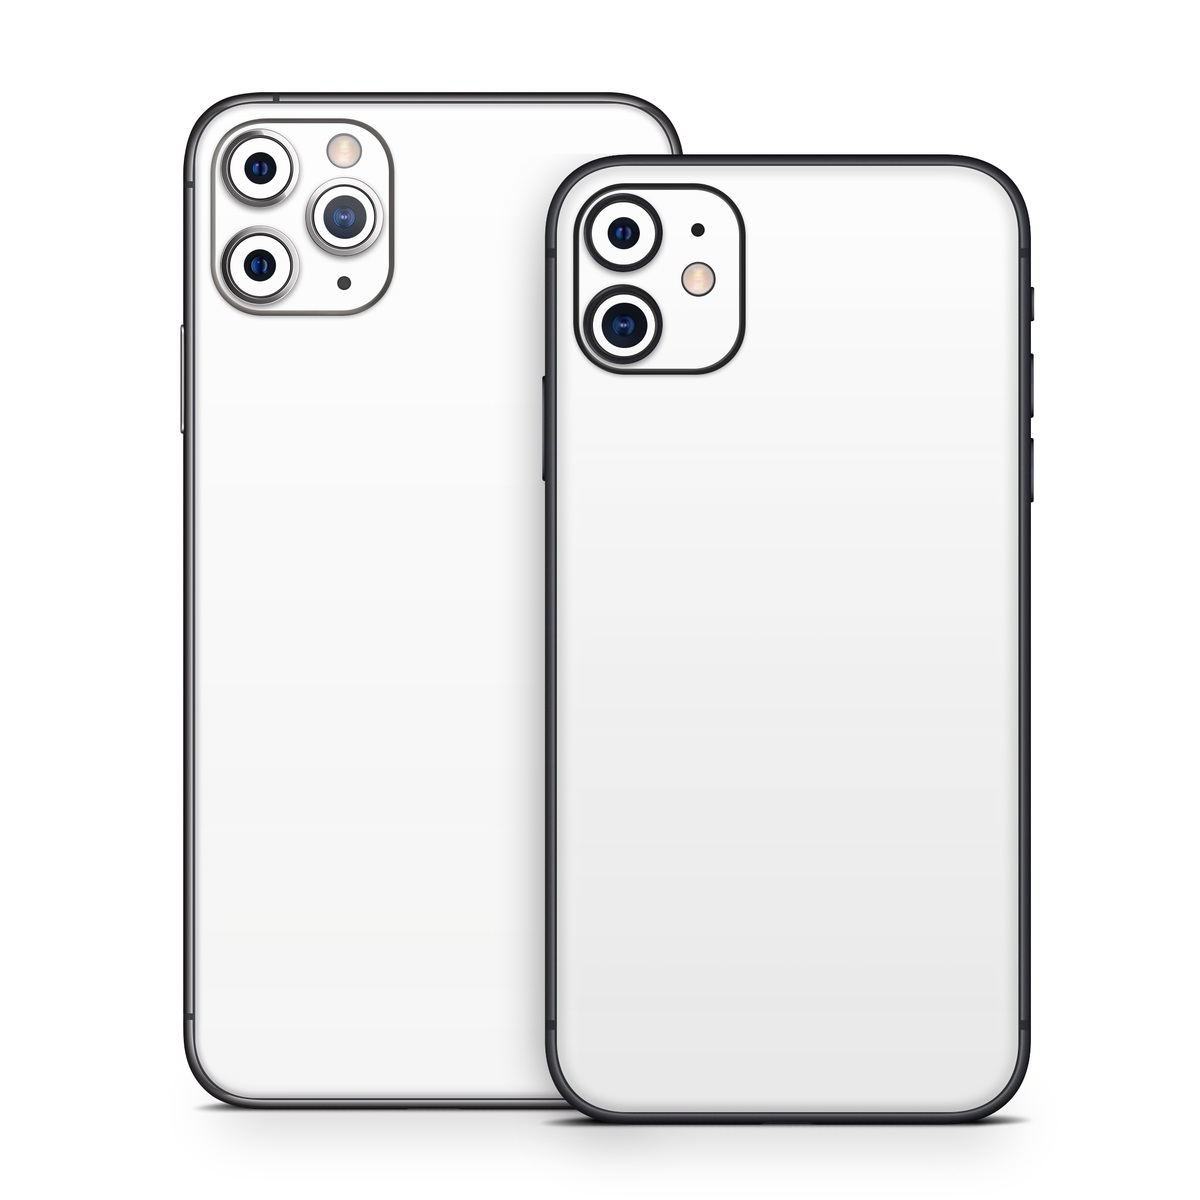 Apple iPhone 11 Skin - Solid State White (Image 1)